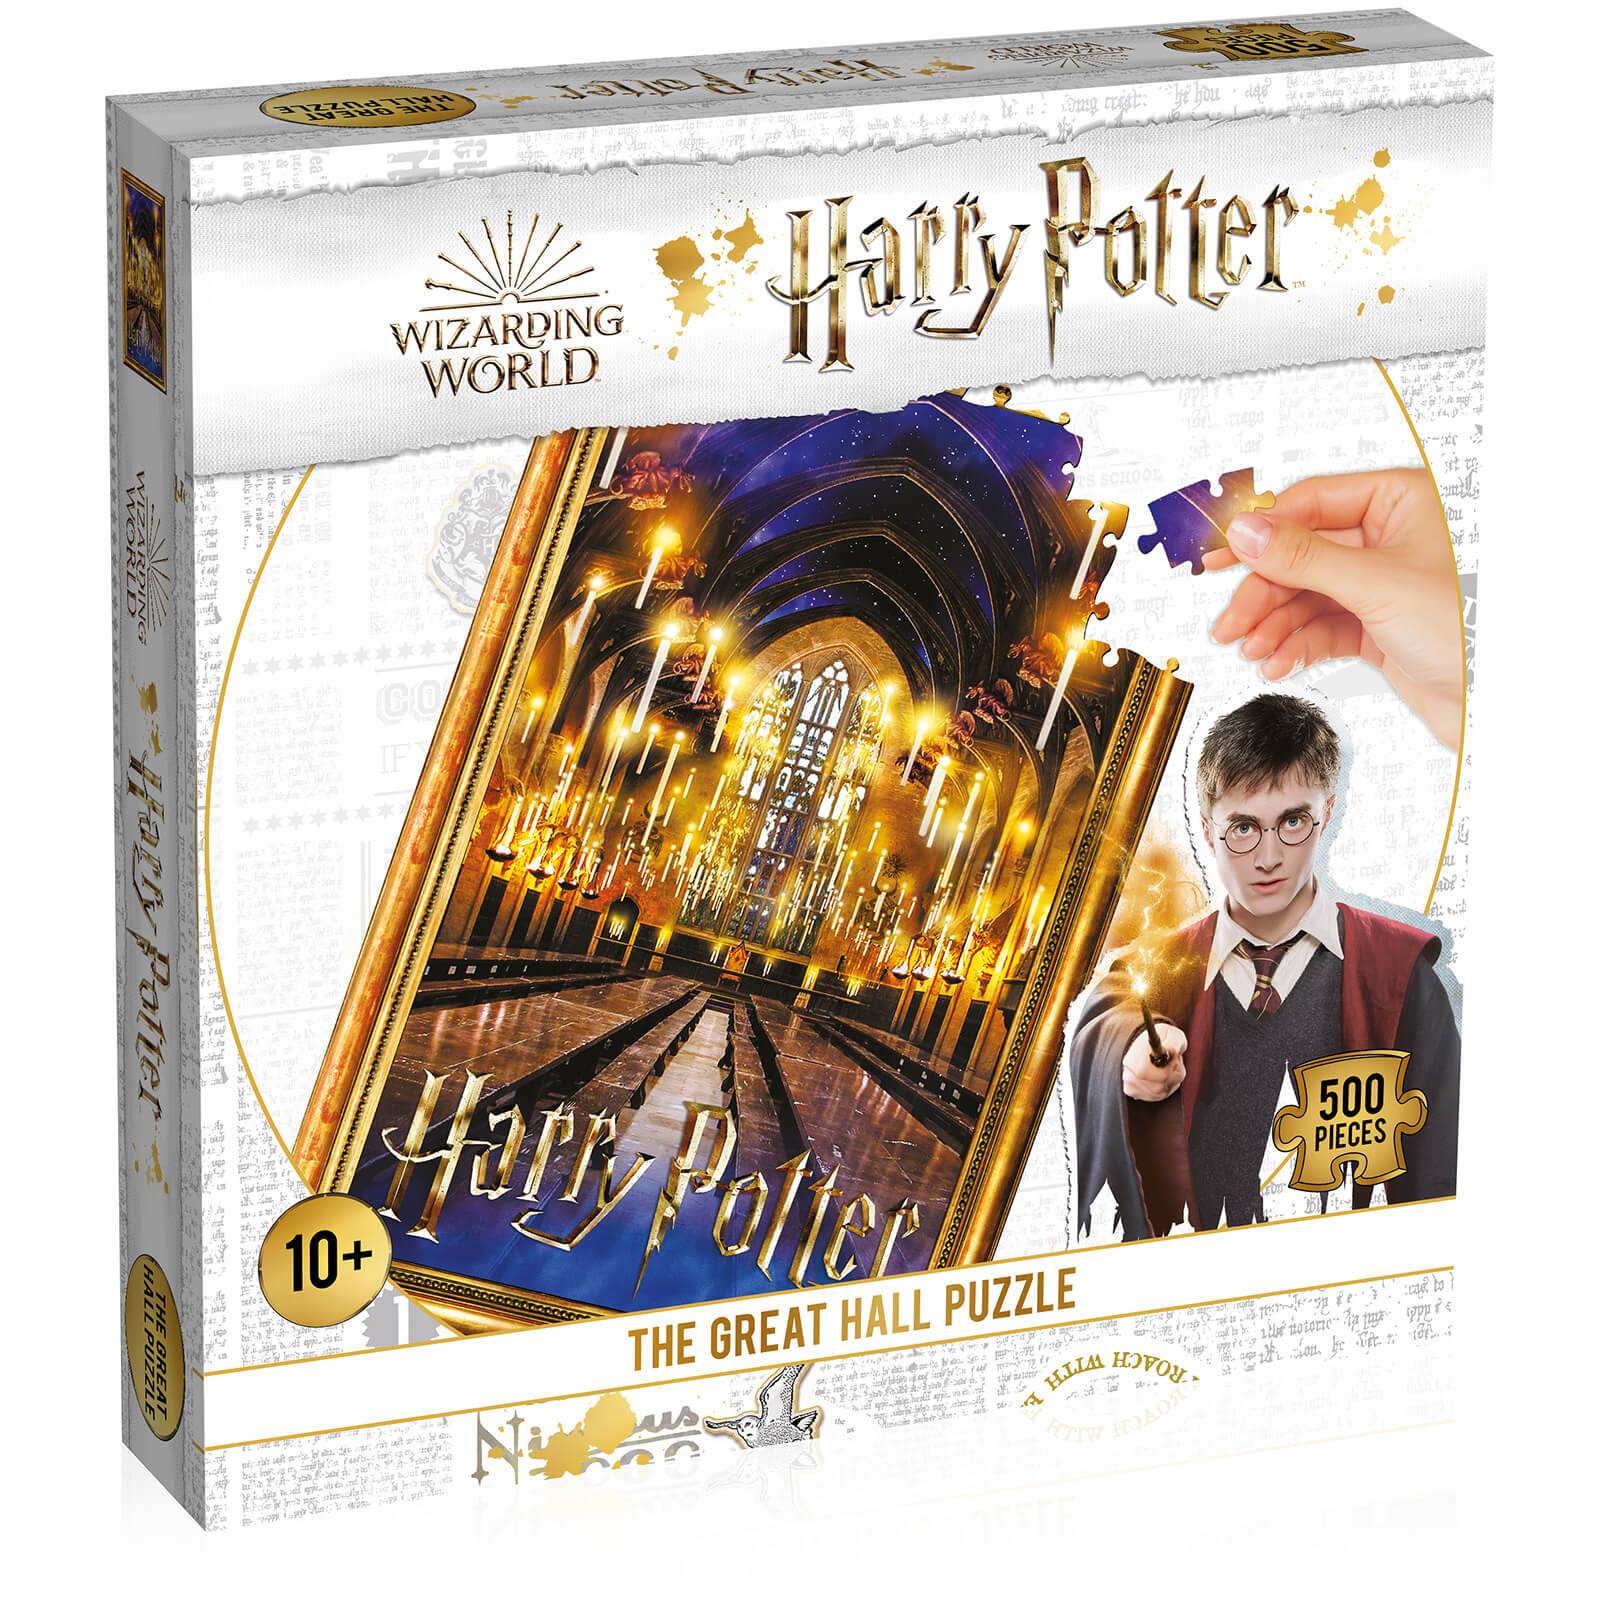 Image of 500 Piece Jigsaw Puzzle - Harry Potter The Great Hall Edition